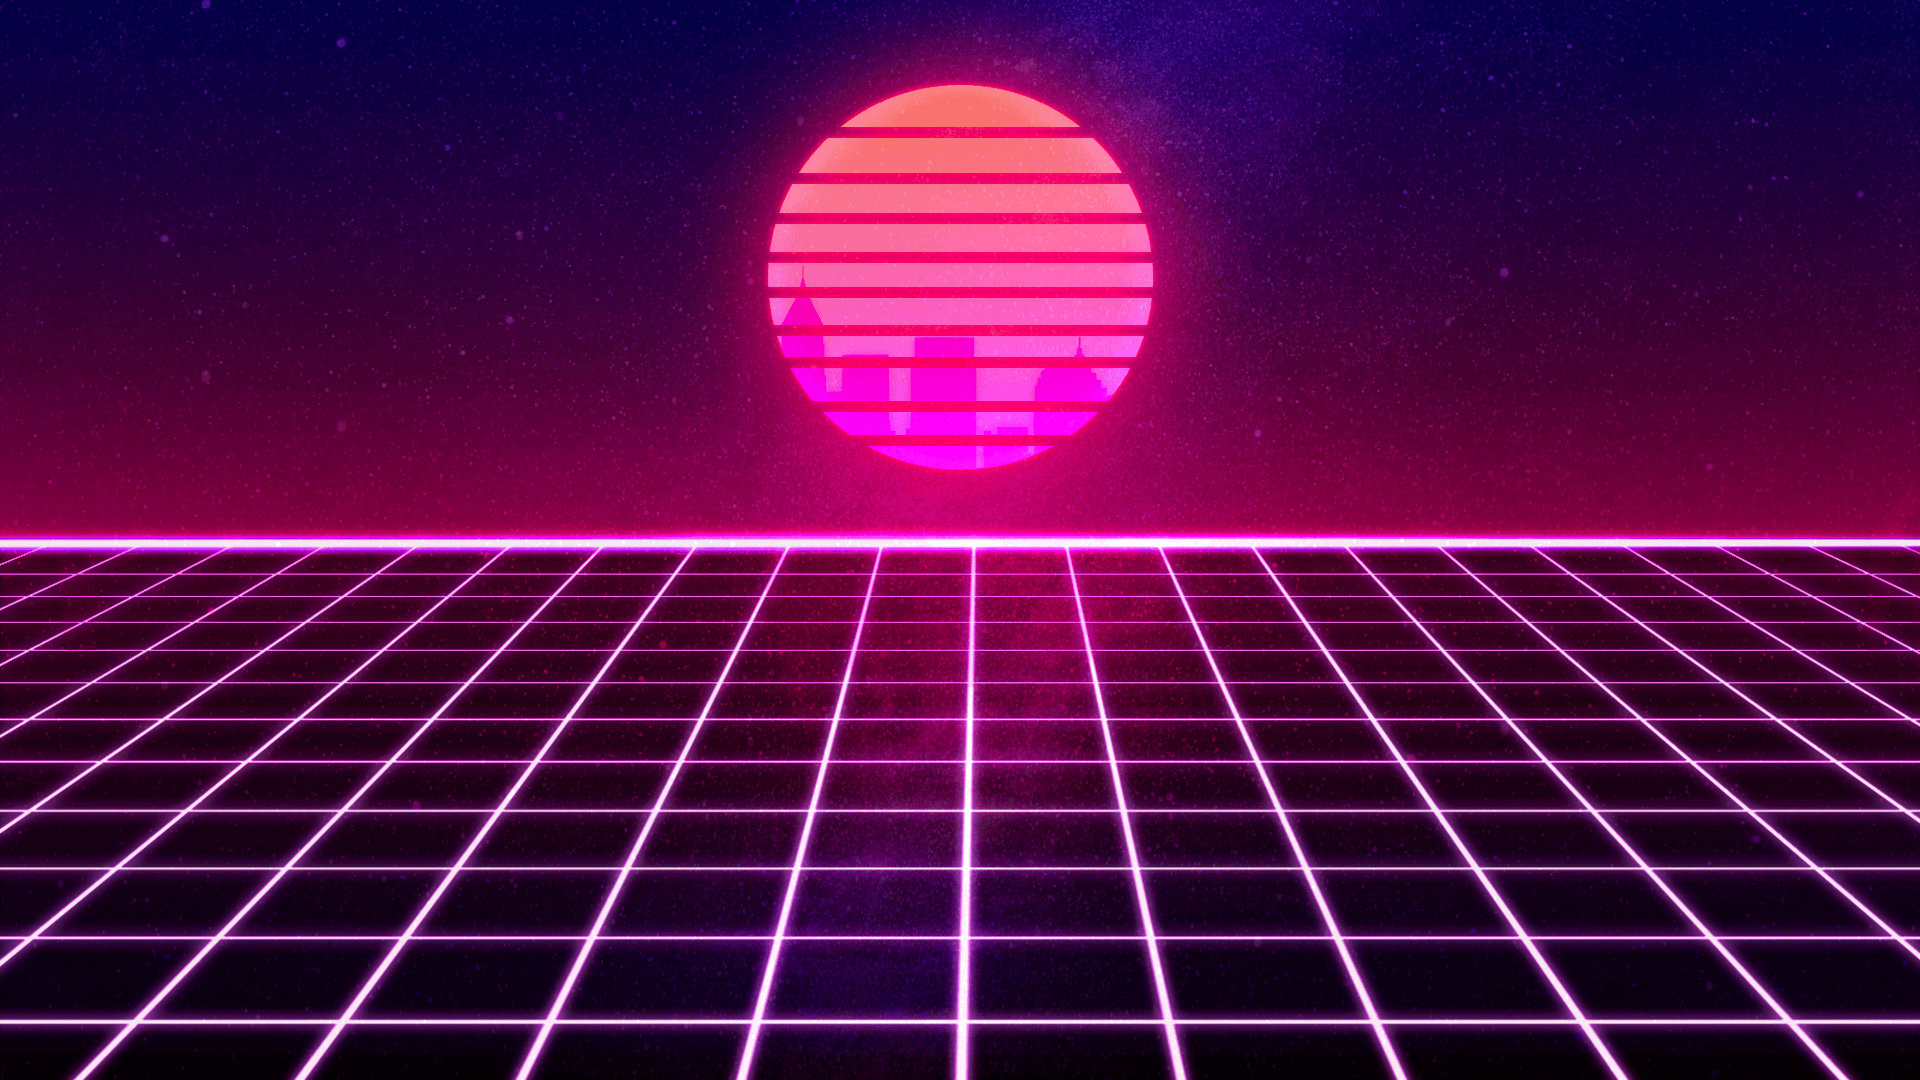 A futuristic image of a purple and pink sunset over a digital landscape - 90s